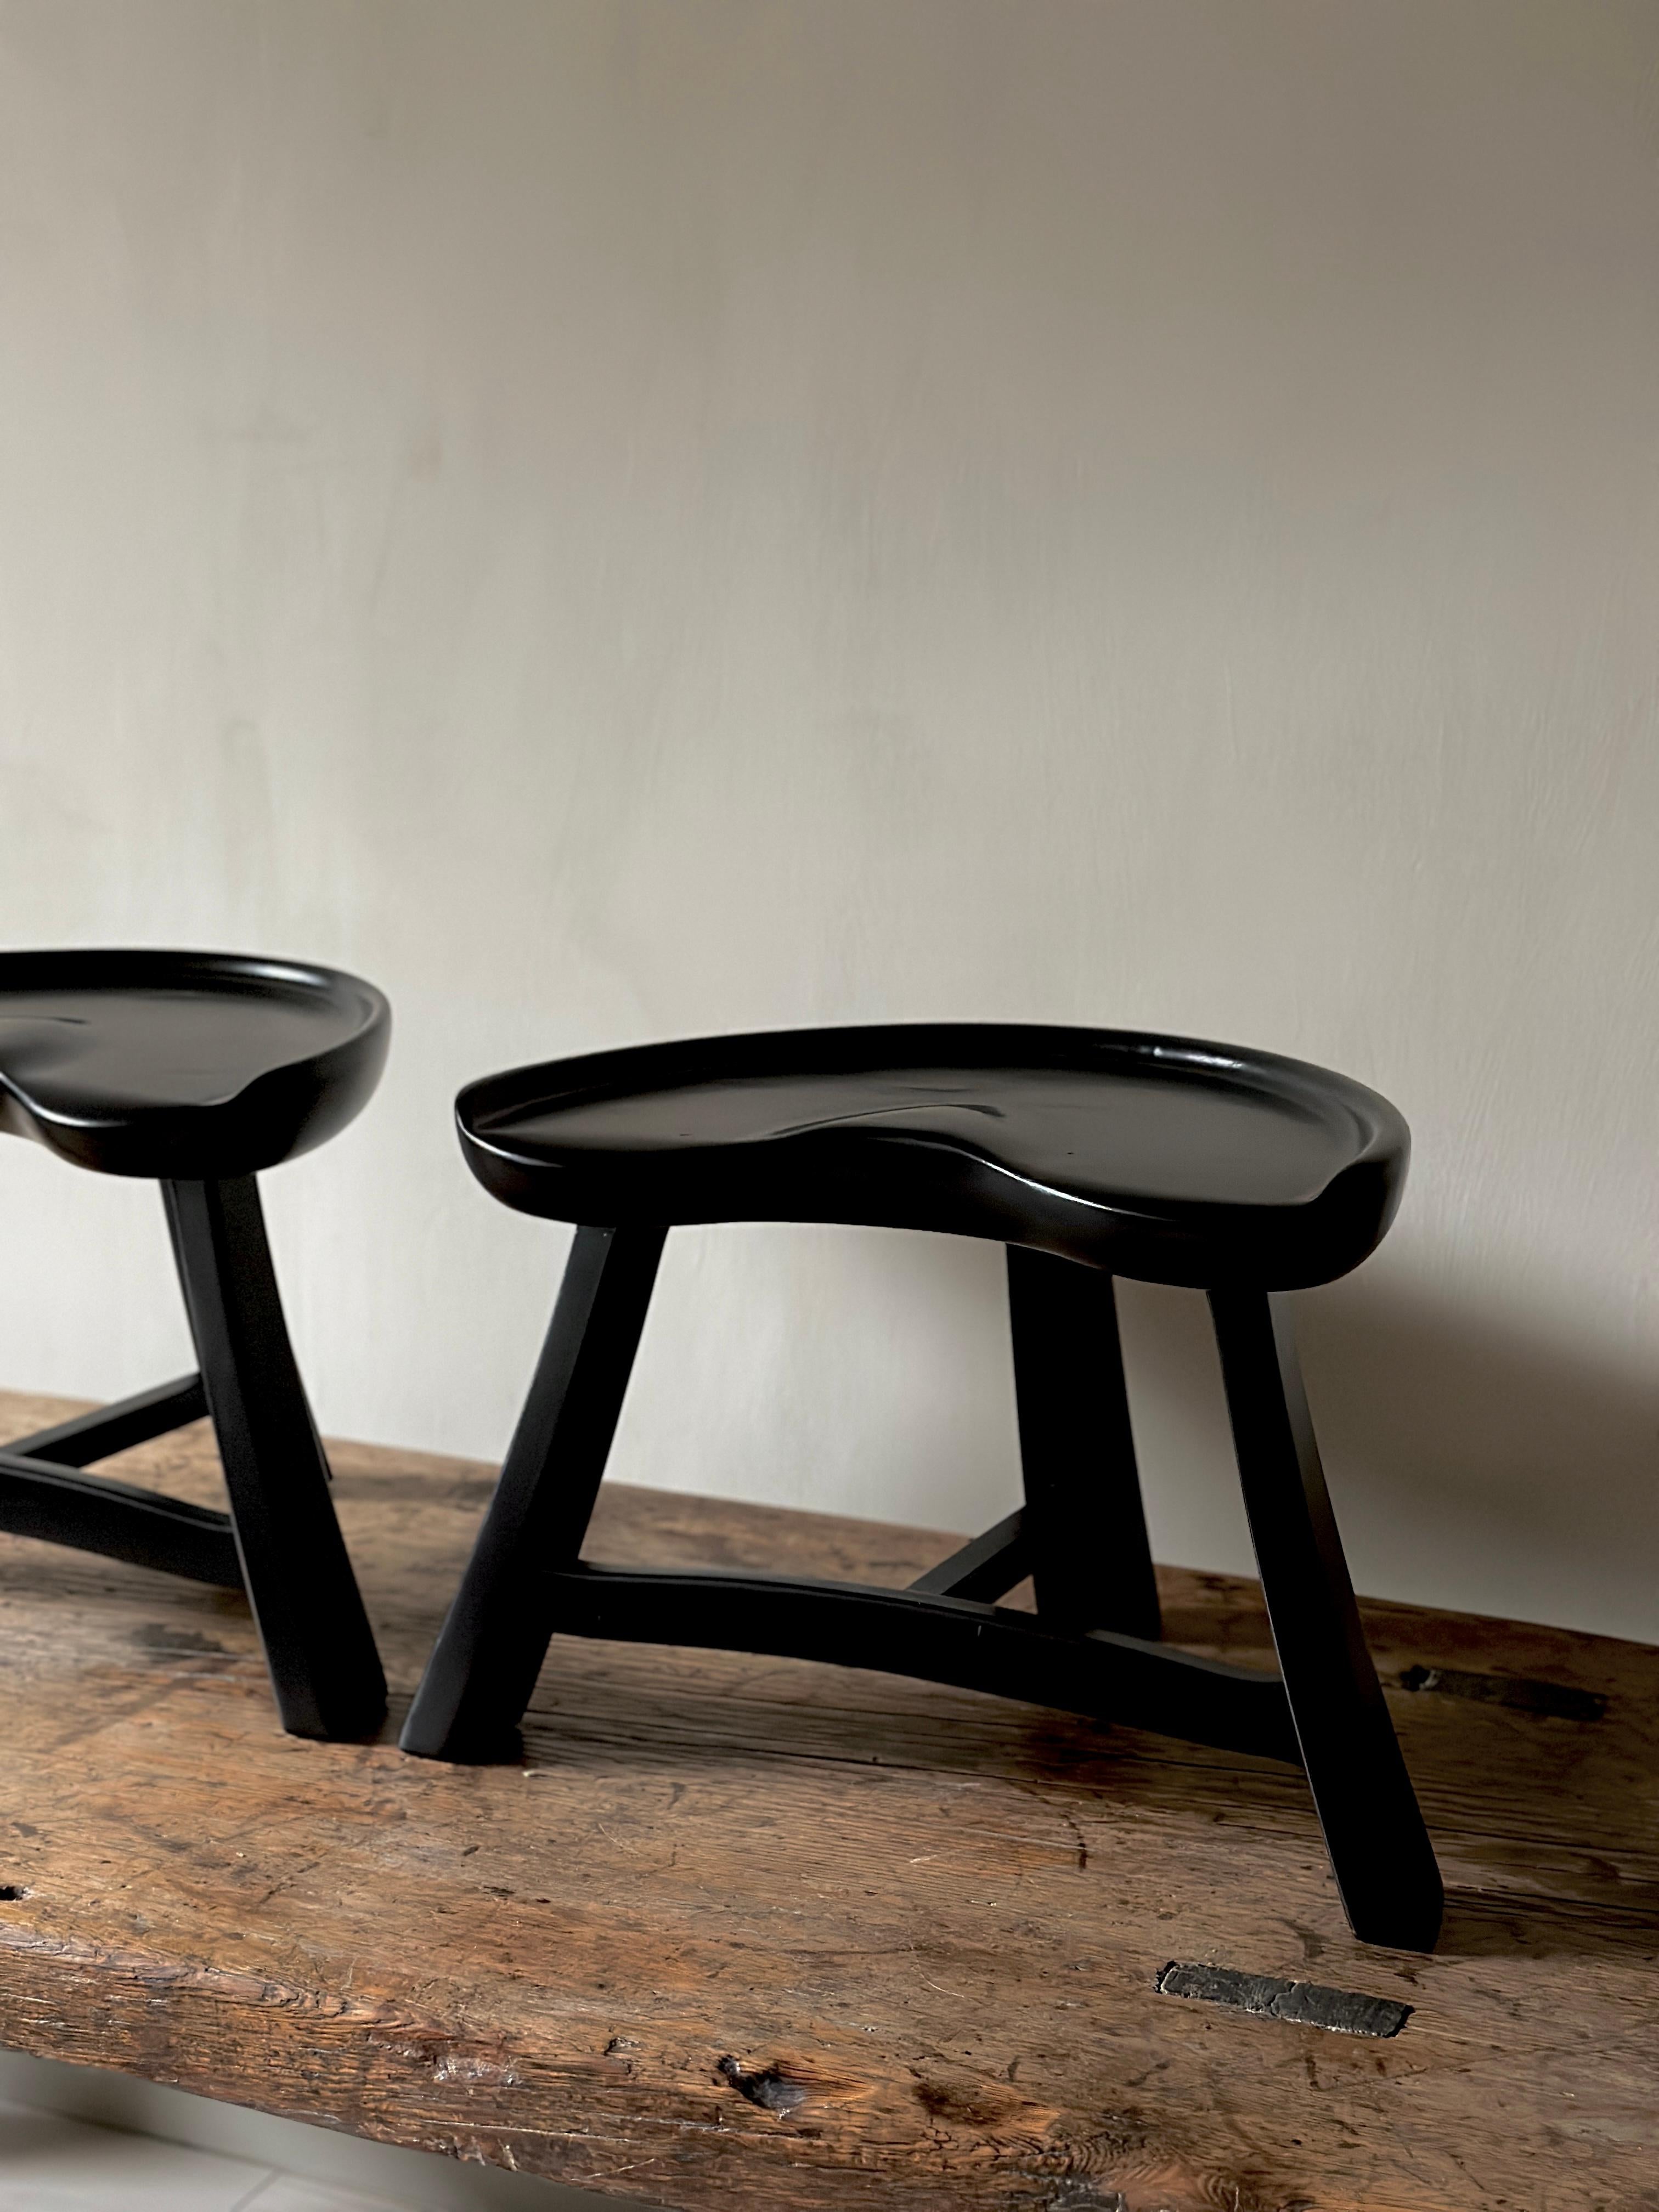 Introducing a beautifully pair of crafted three-legged pine stool, model no. 522 by Krogenæs Møbler. This stunning piece of furniture was designed in Norway in 1964 by none other than the factory owner himself, Rangvald Krogenæs. The stool, known as